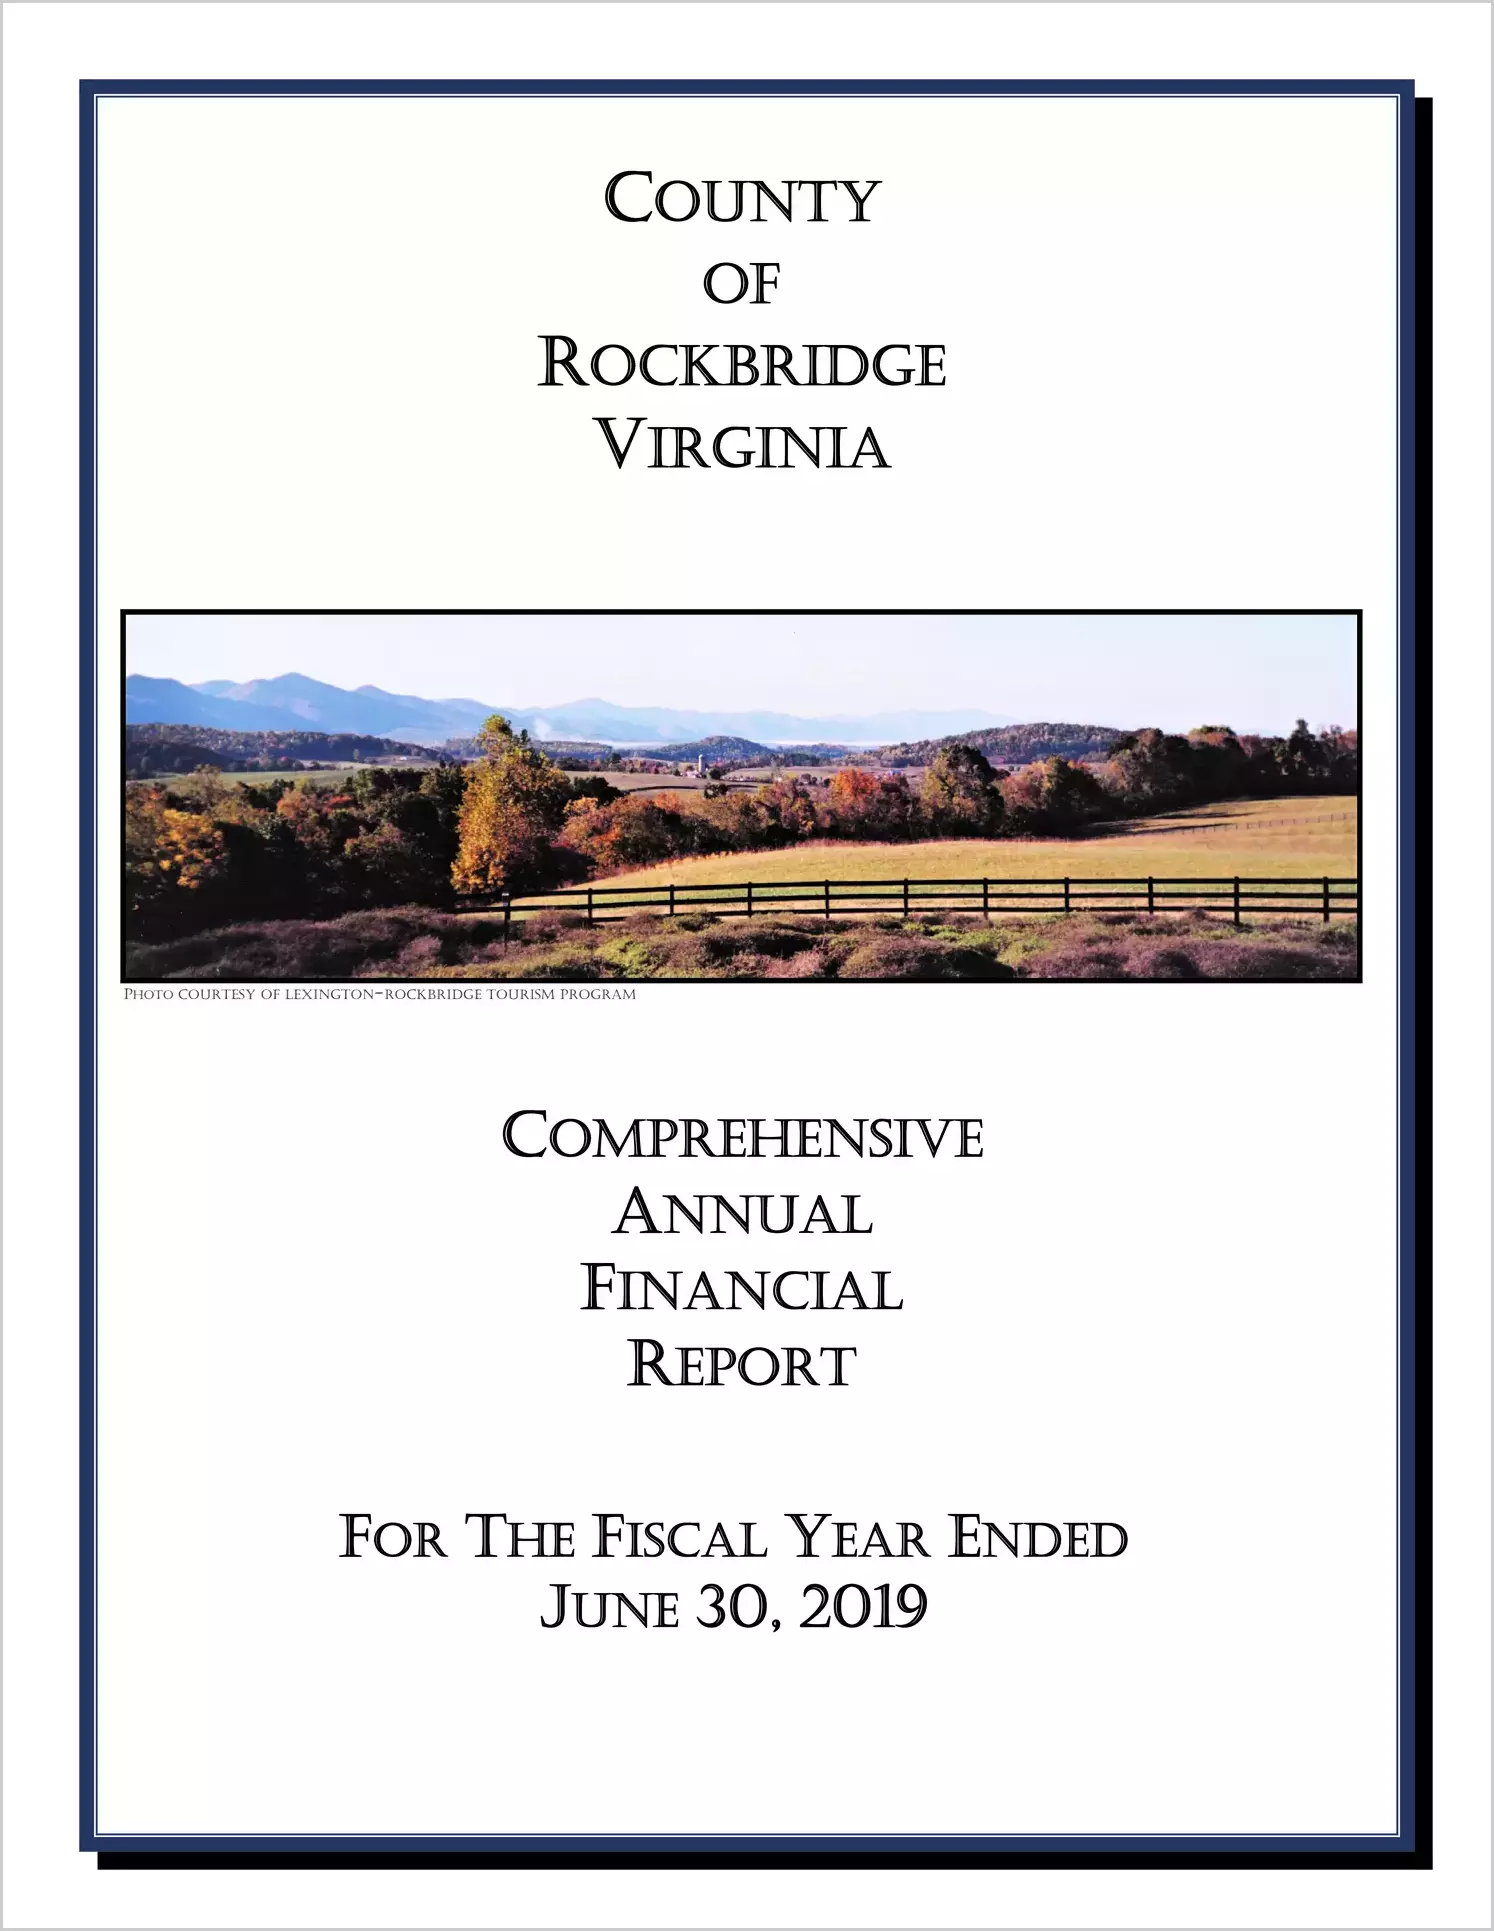 2019 Annual Financial Report for County of Rockbridge